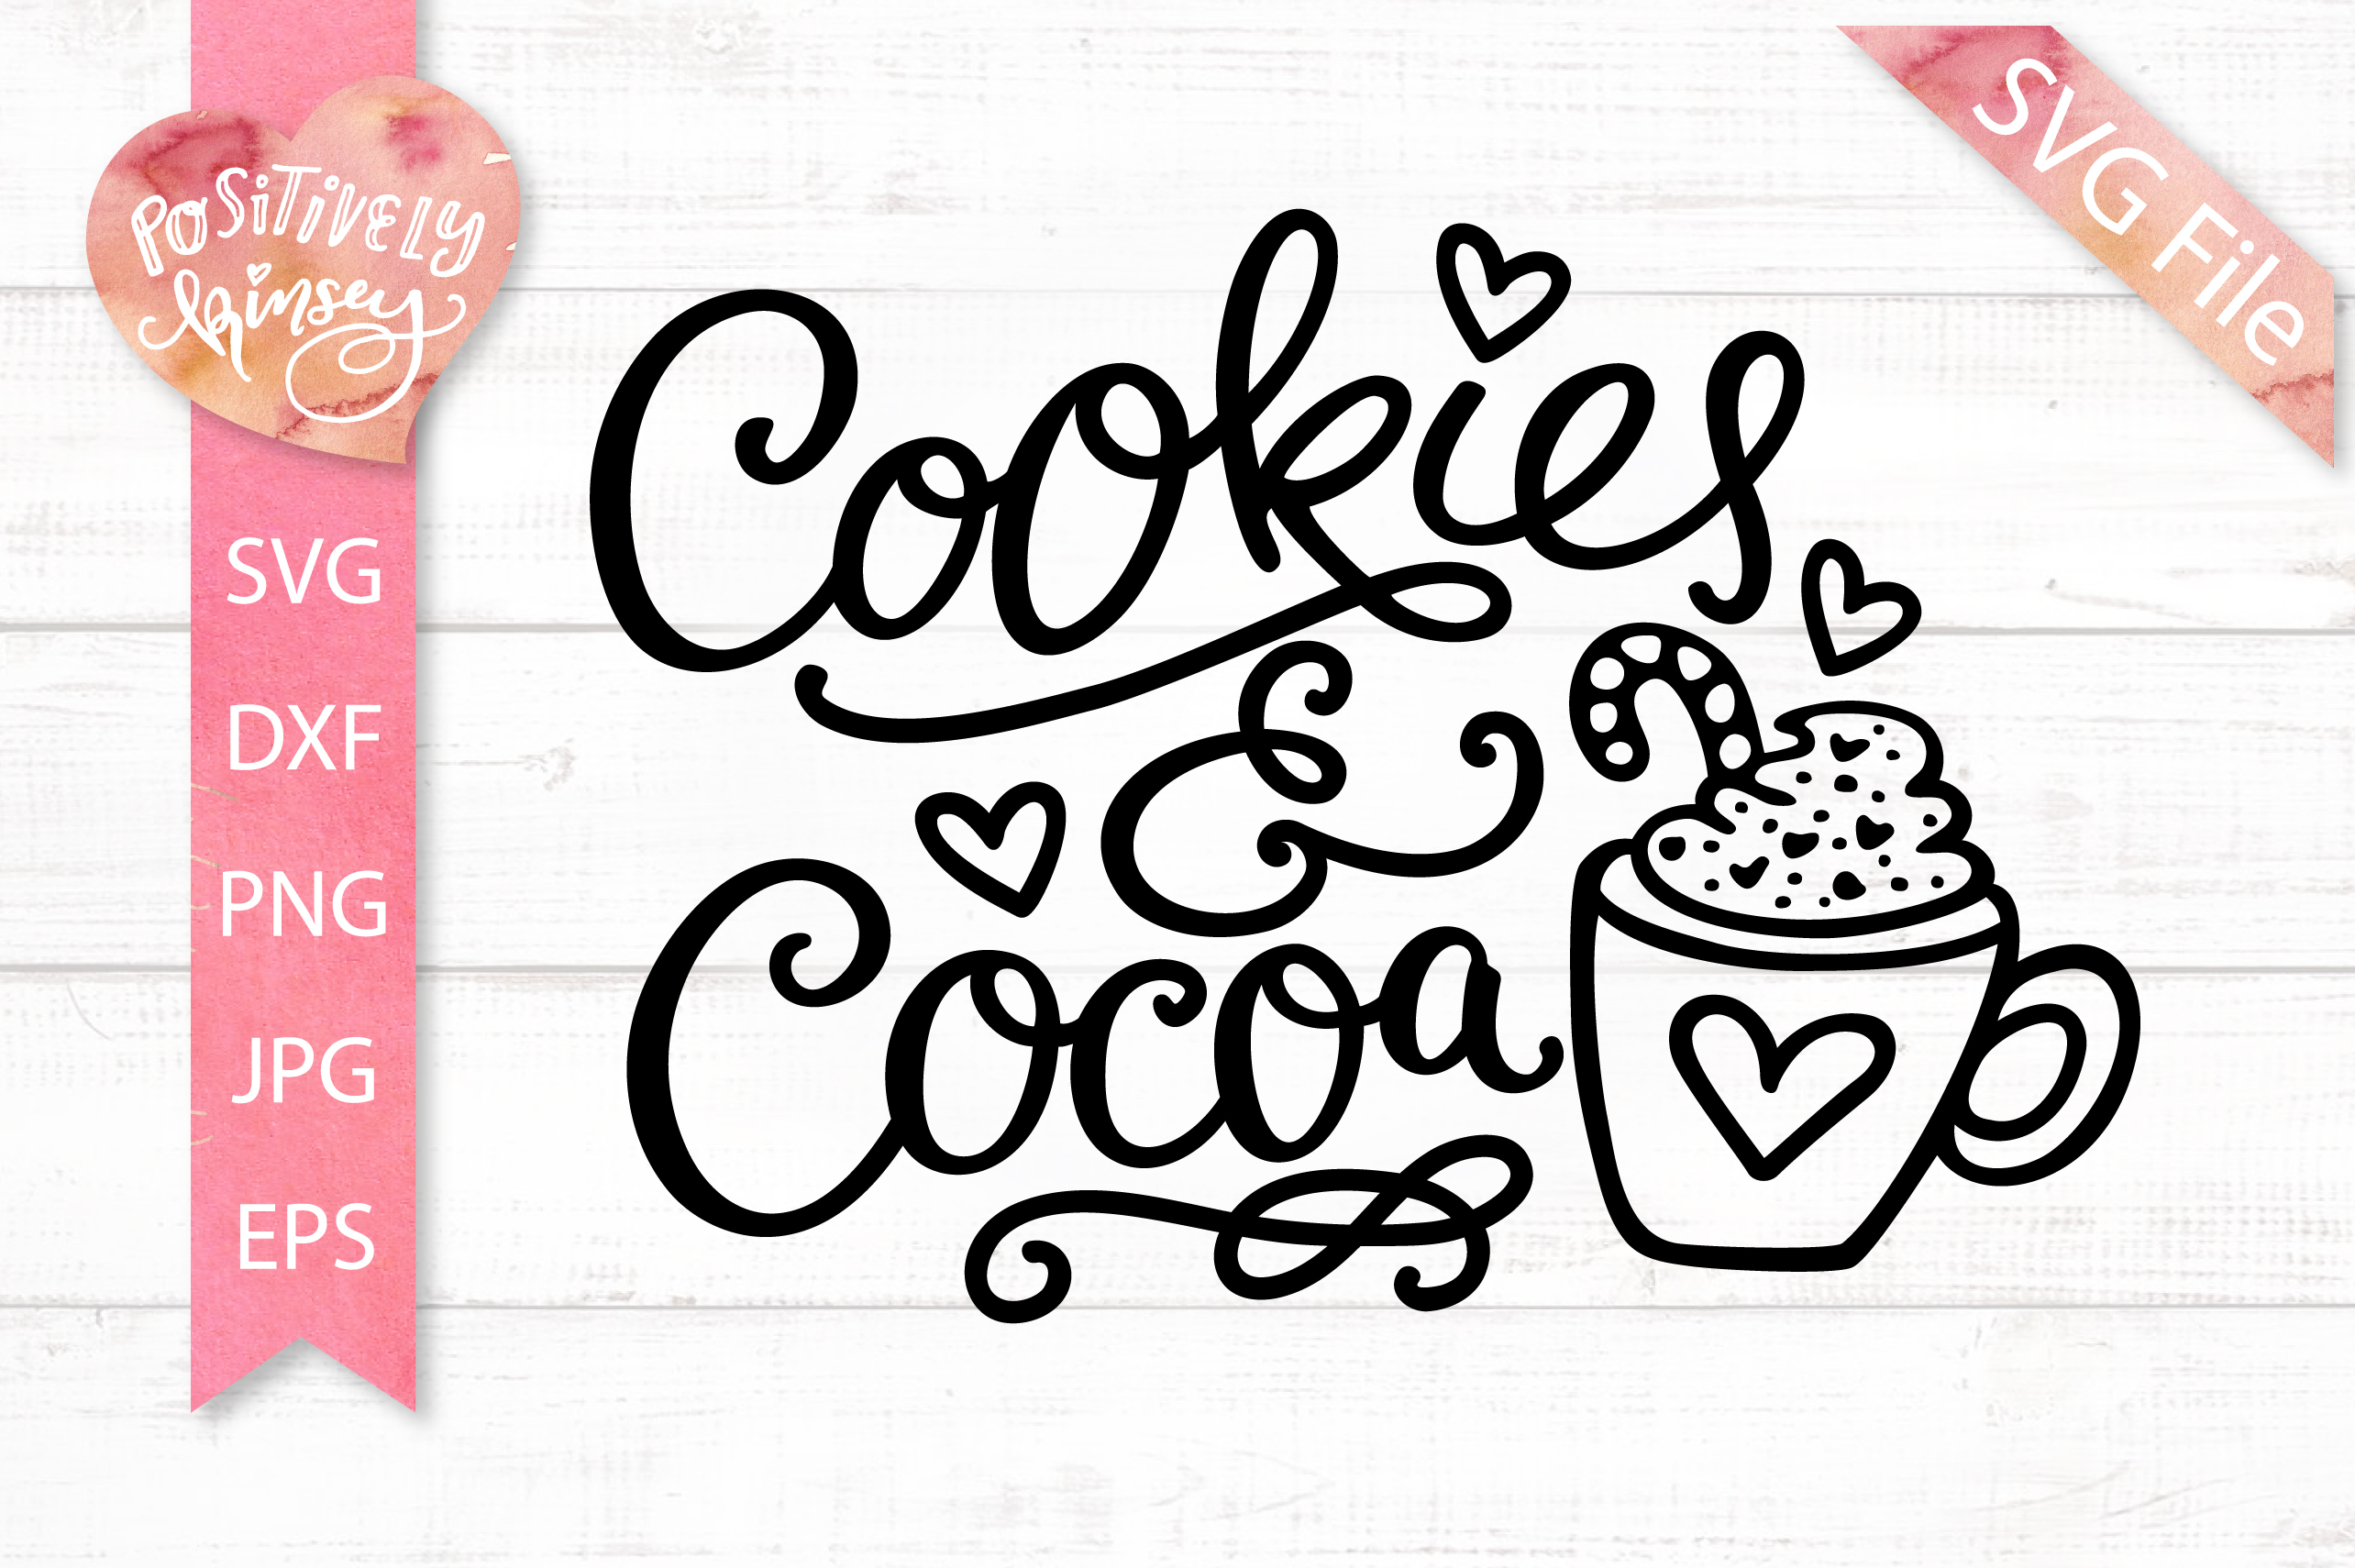 Download Cookies and Cocoa SVG DXF PNG EPS, Christmas Baking SVG File